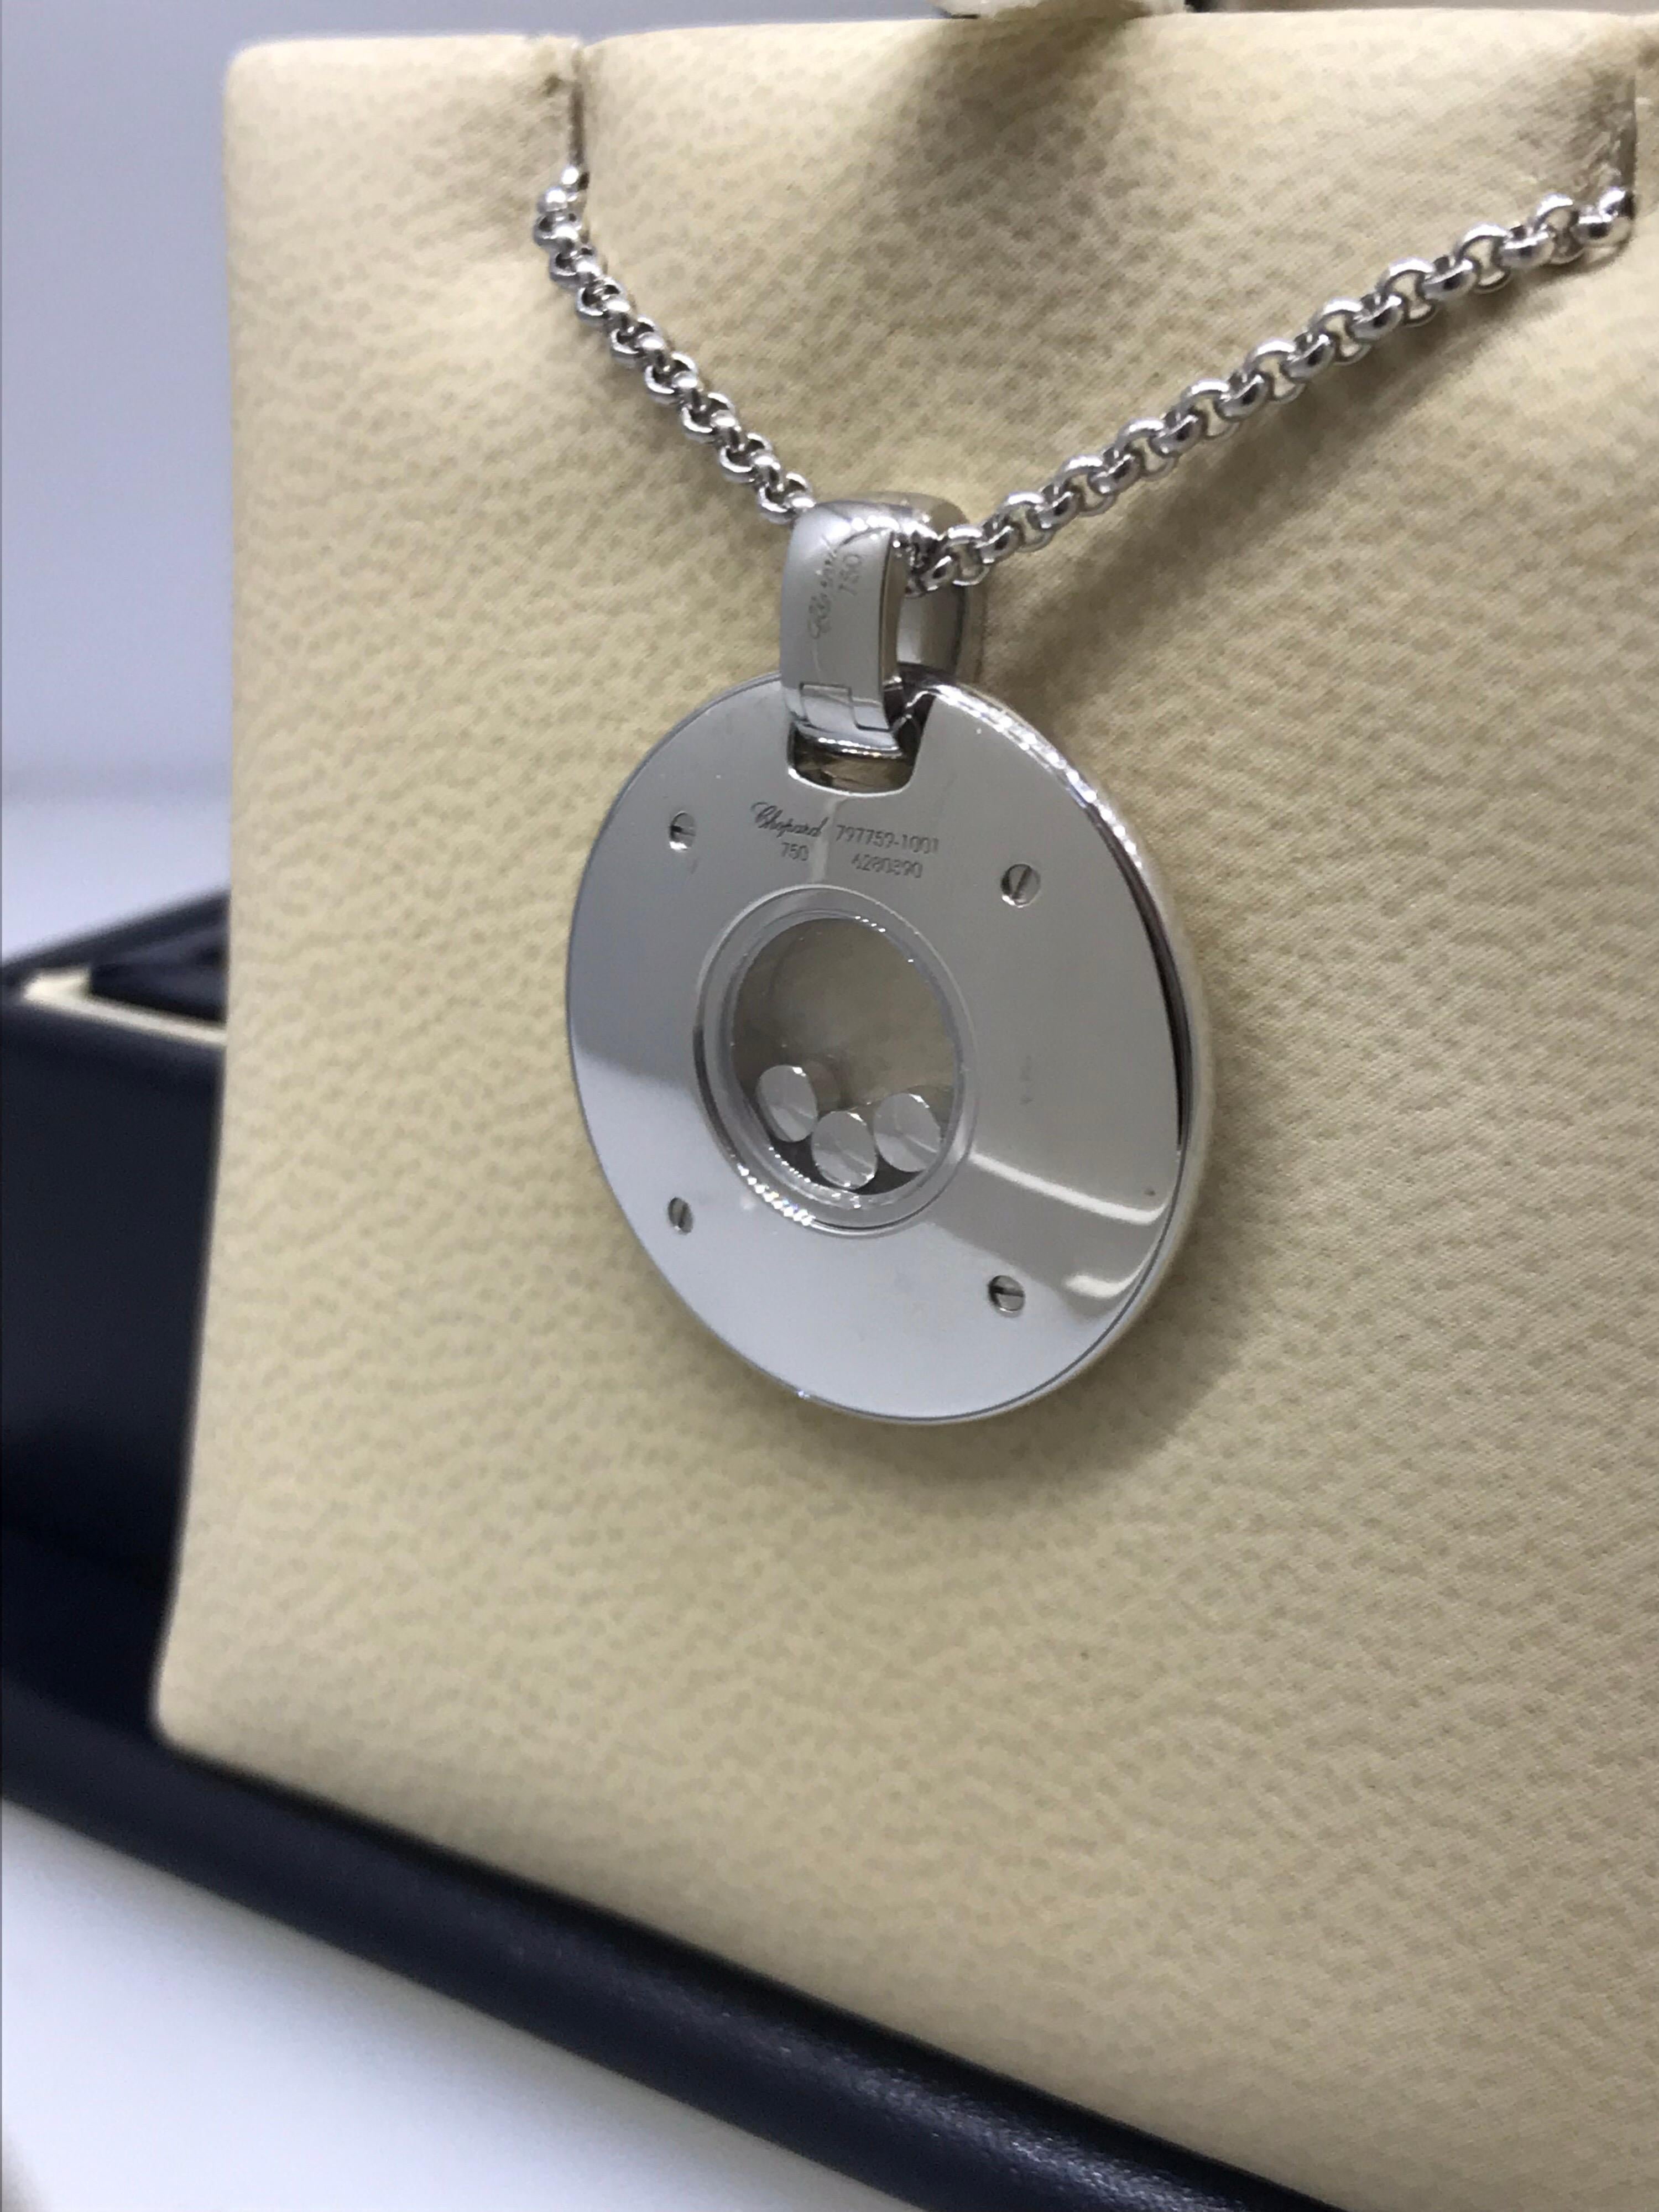 Chopard Chopardissimo White Gold Diamond Pendant Necklace 79/7759-1001 In New Condition For Sale In New York, NY